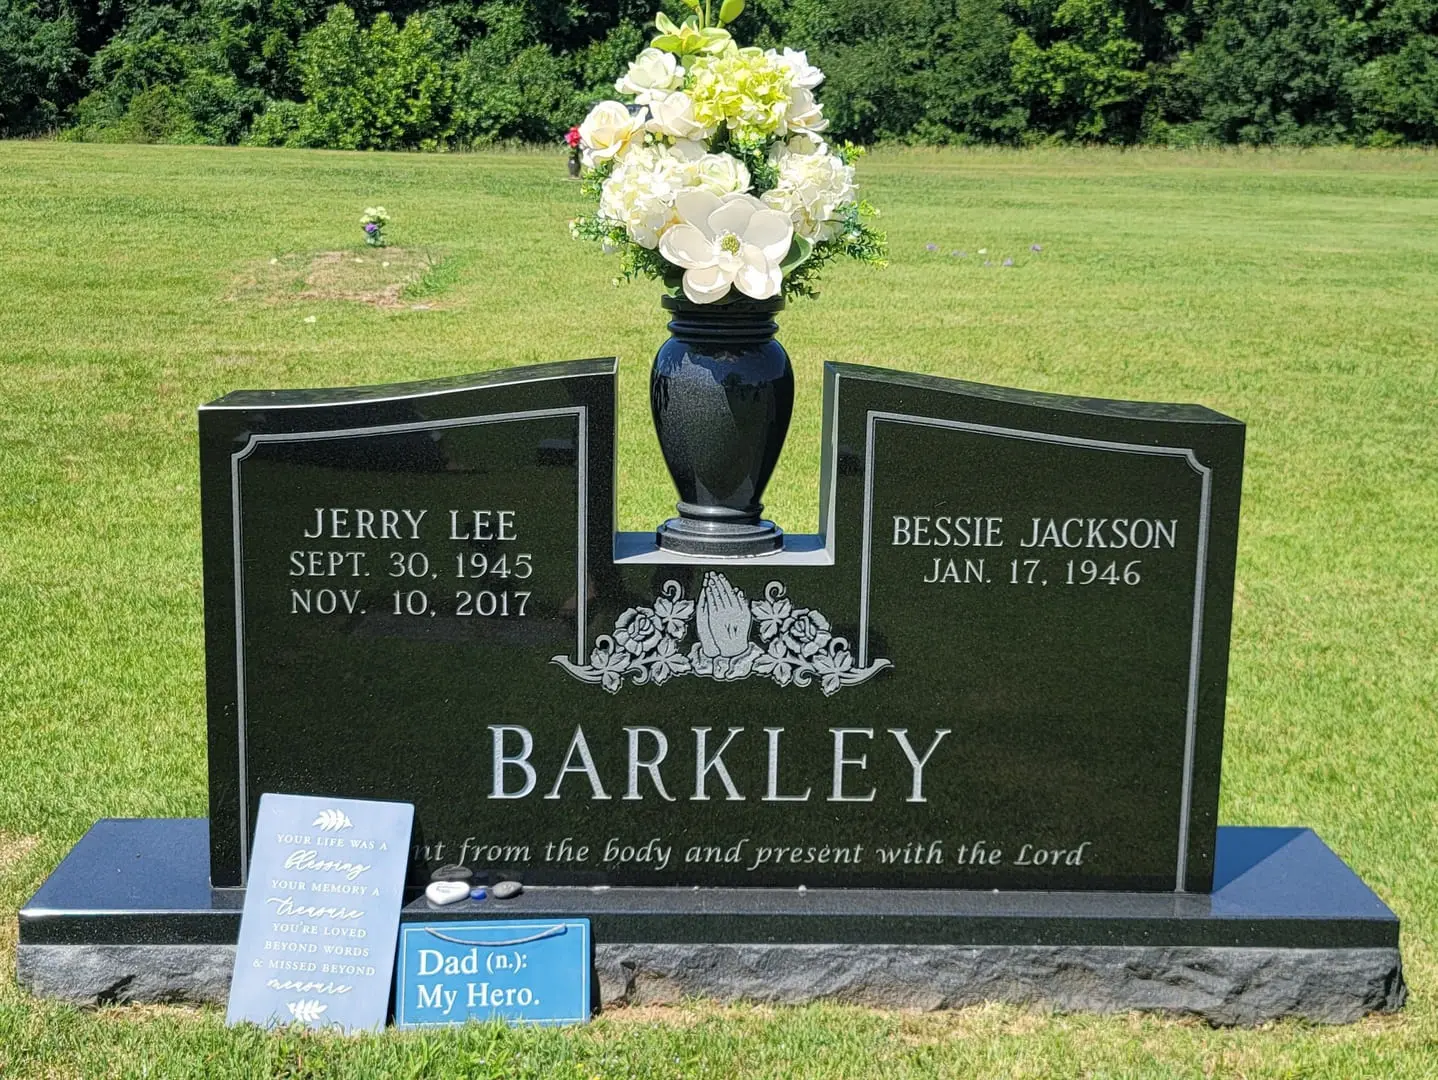 A memorial slab for Jerry Lee and Bessie Jackson Barkey